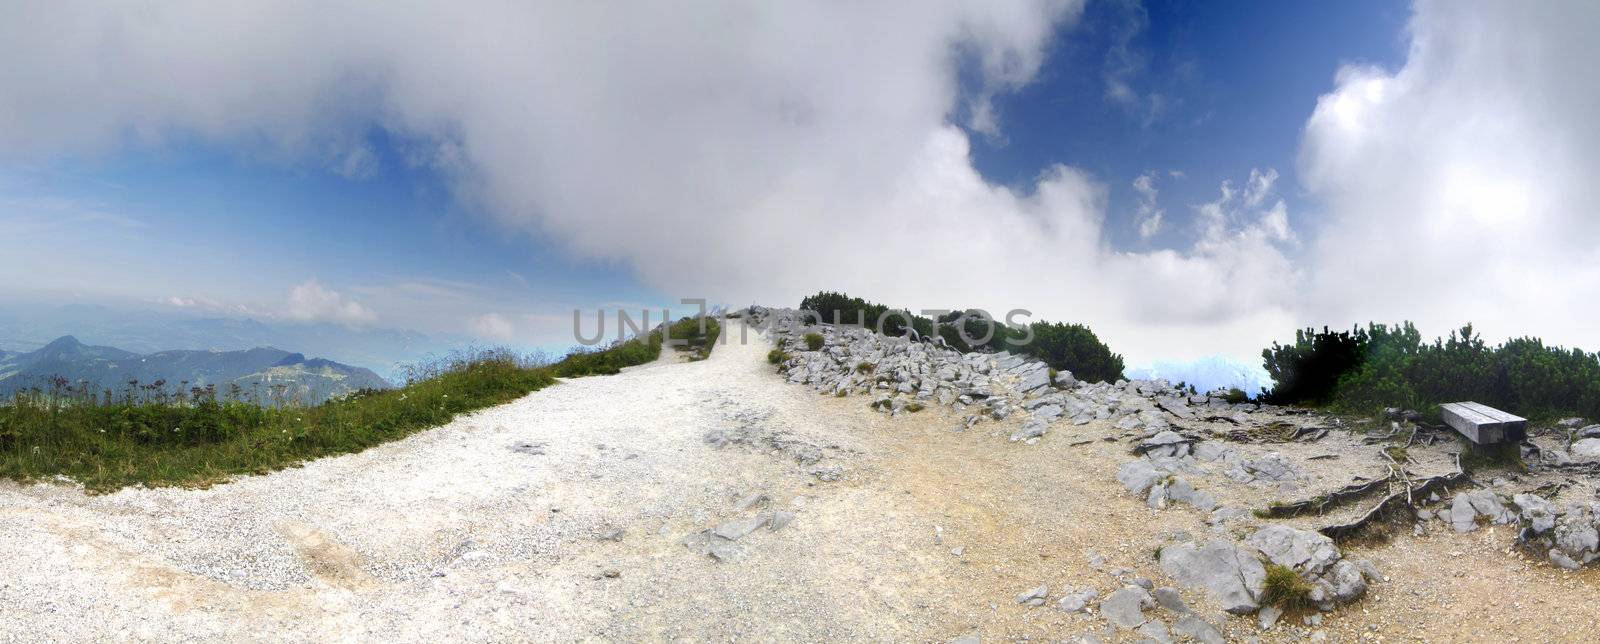 Panoramic picture of the path on one of the alpine peaks hidden in the clouds